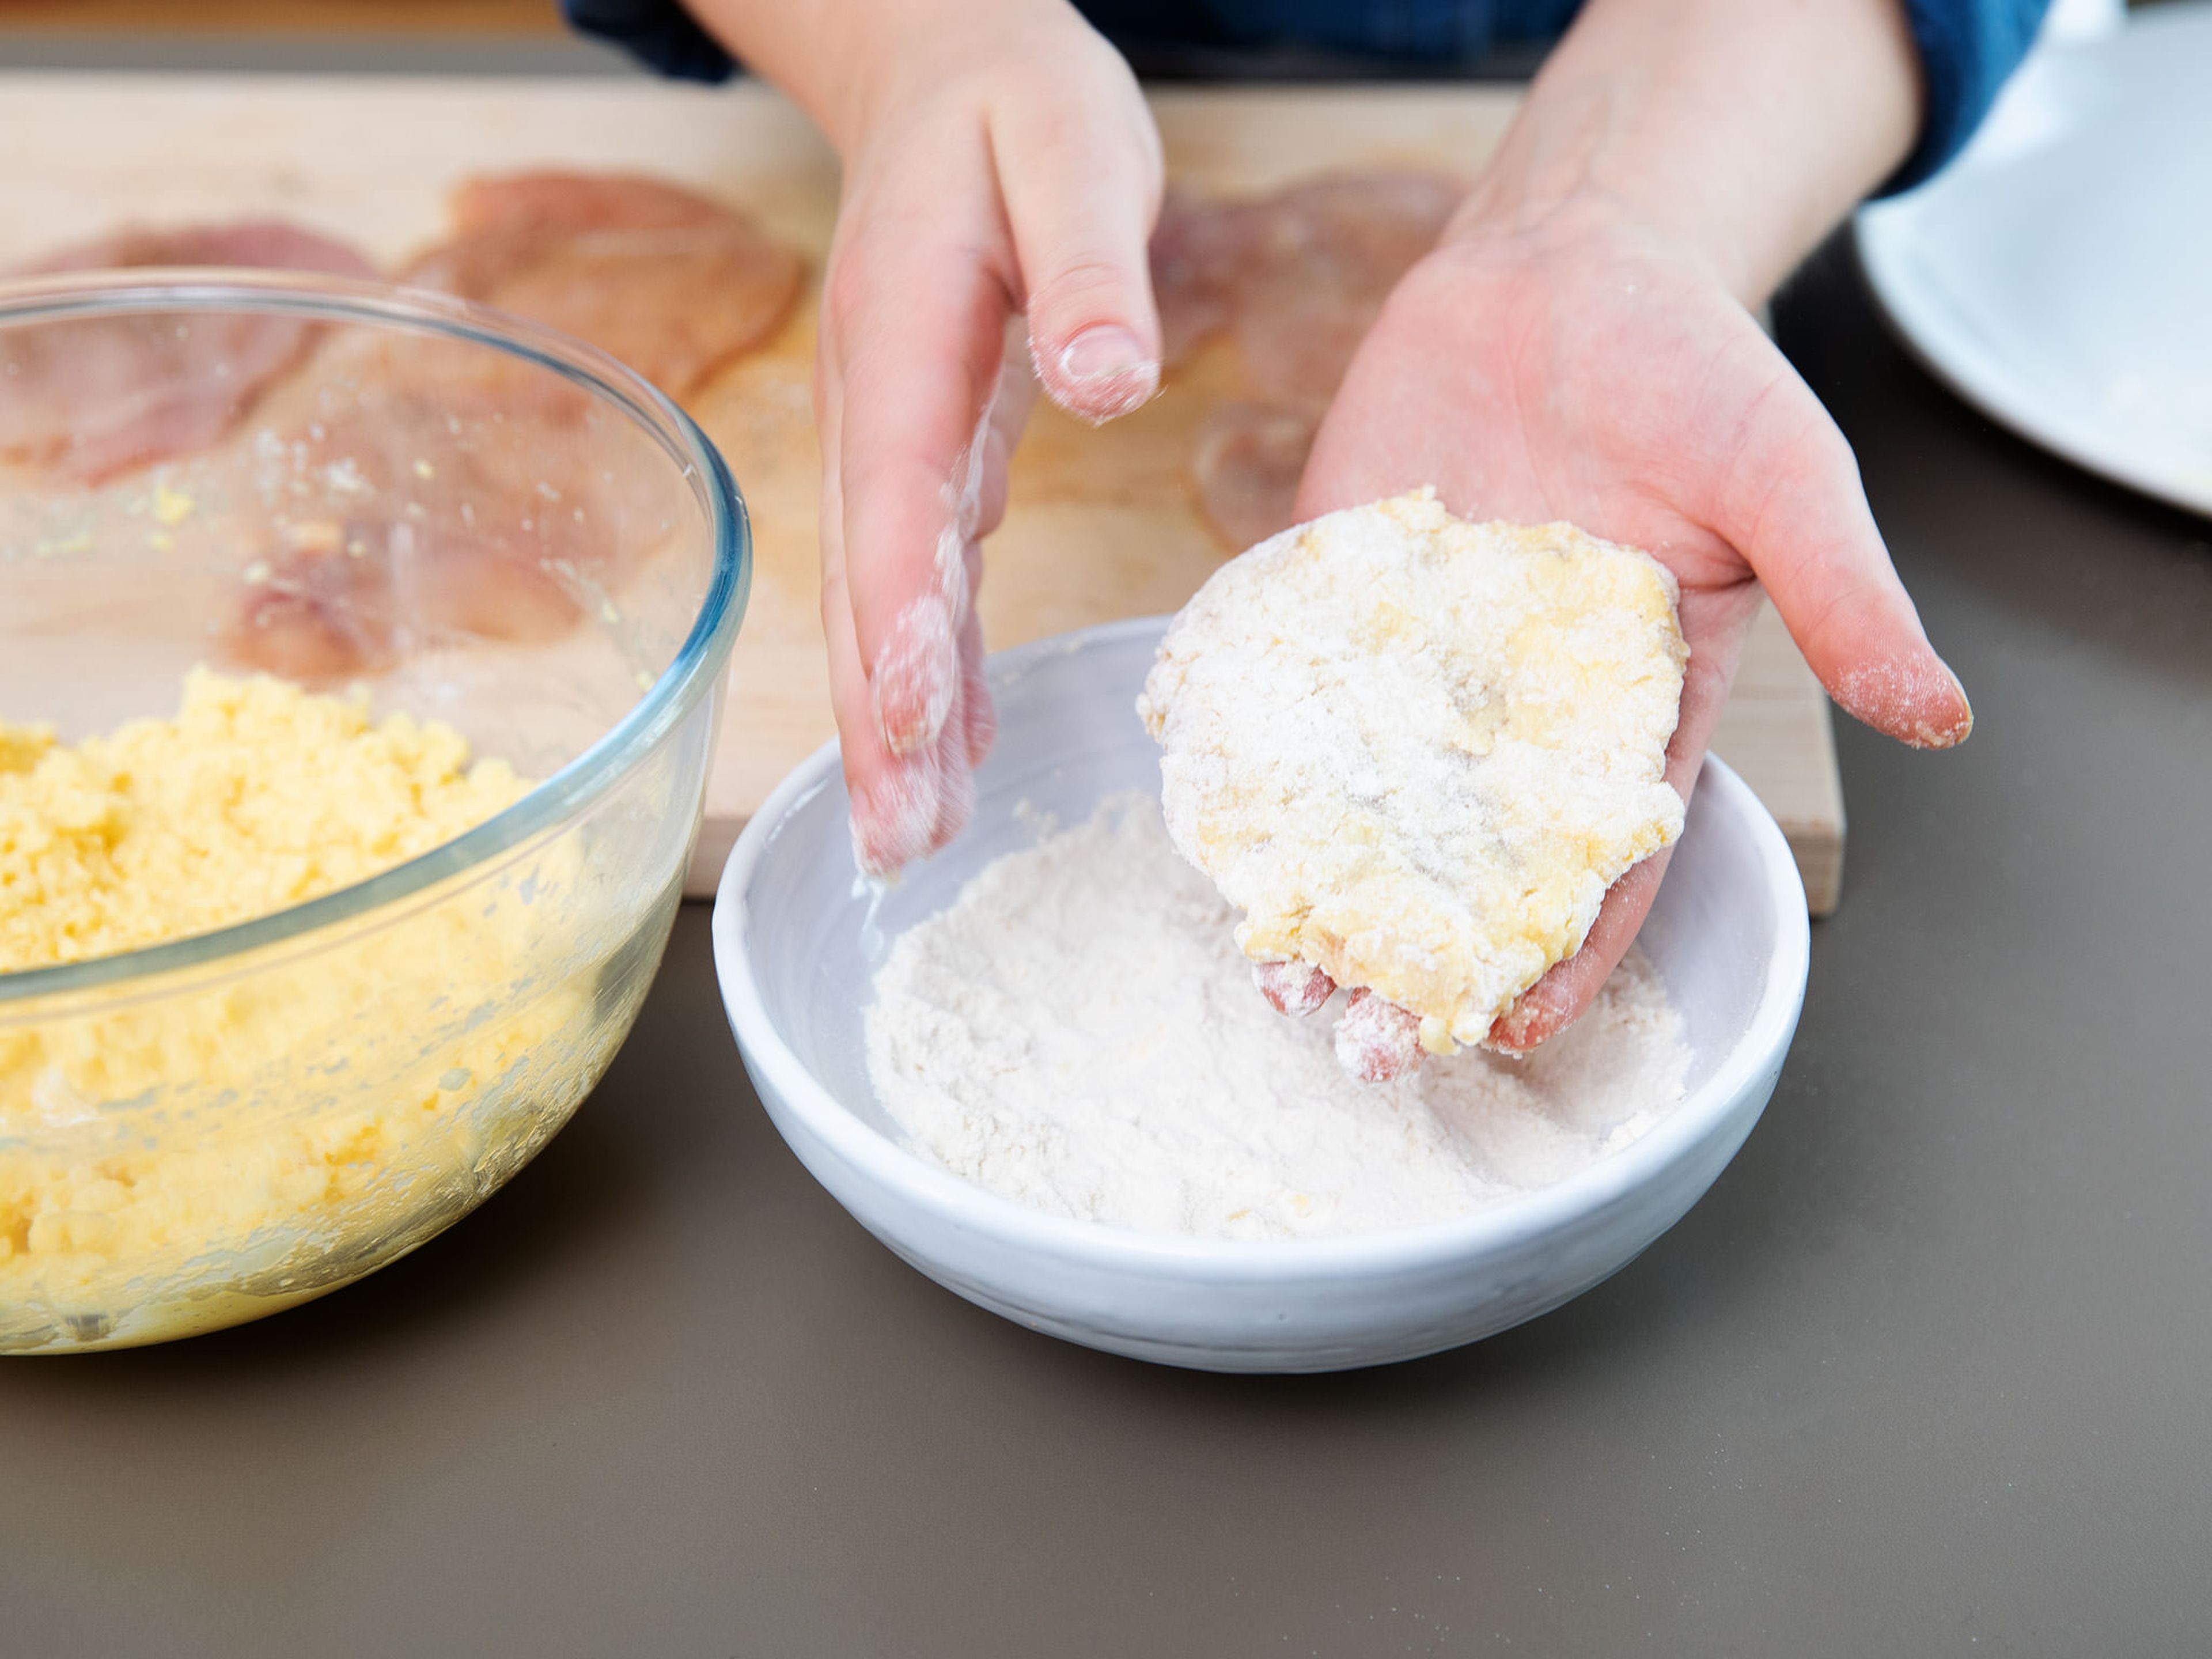 Cut chicken breast into desired pieces. Transfer to plastic wrap and cover with plastic wrap. Using a meat tenderizer, pound the chicken breasts until as thin as possible and set aside. Crack eggs into a bowl and whisk. Add grated Parmesan cheese and stir to combine. Add flour to another bowl. Remove chicken breast from plastic foil and season with salt and pepper on both sides. Dredge in flour, then in Parmesan-egg coating and in flour again.